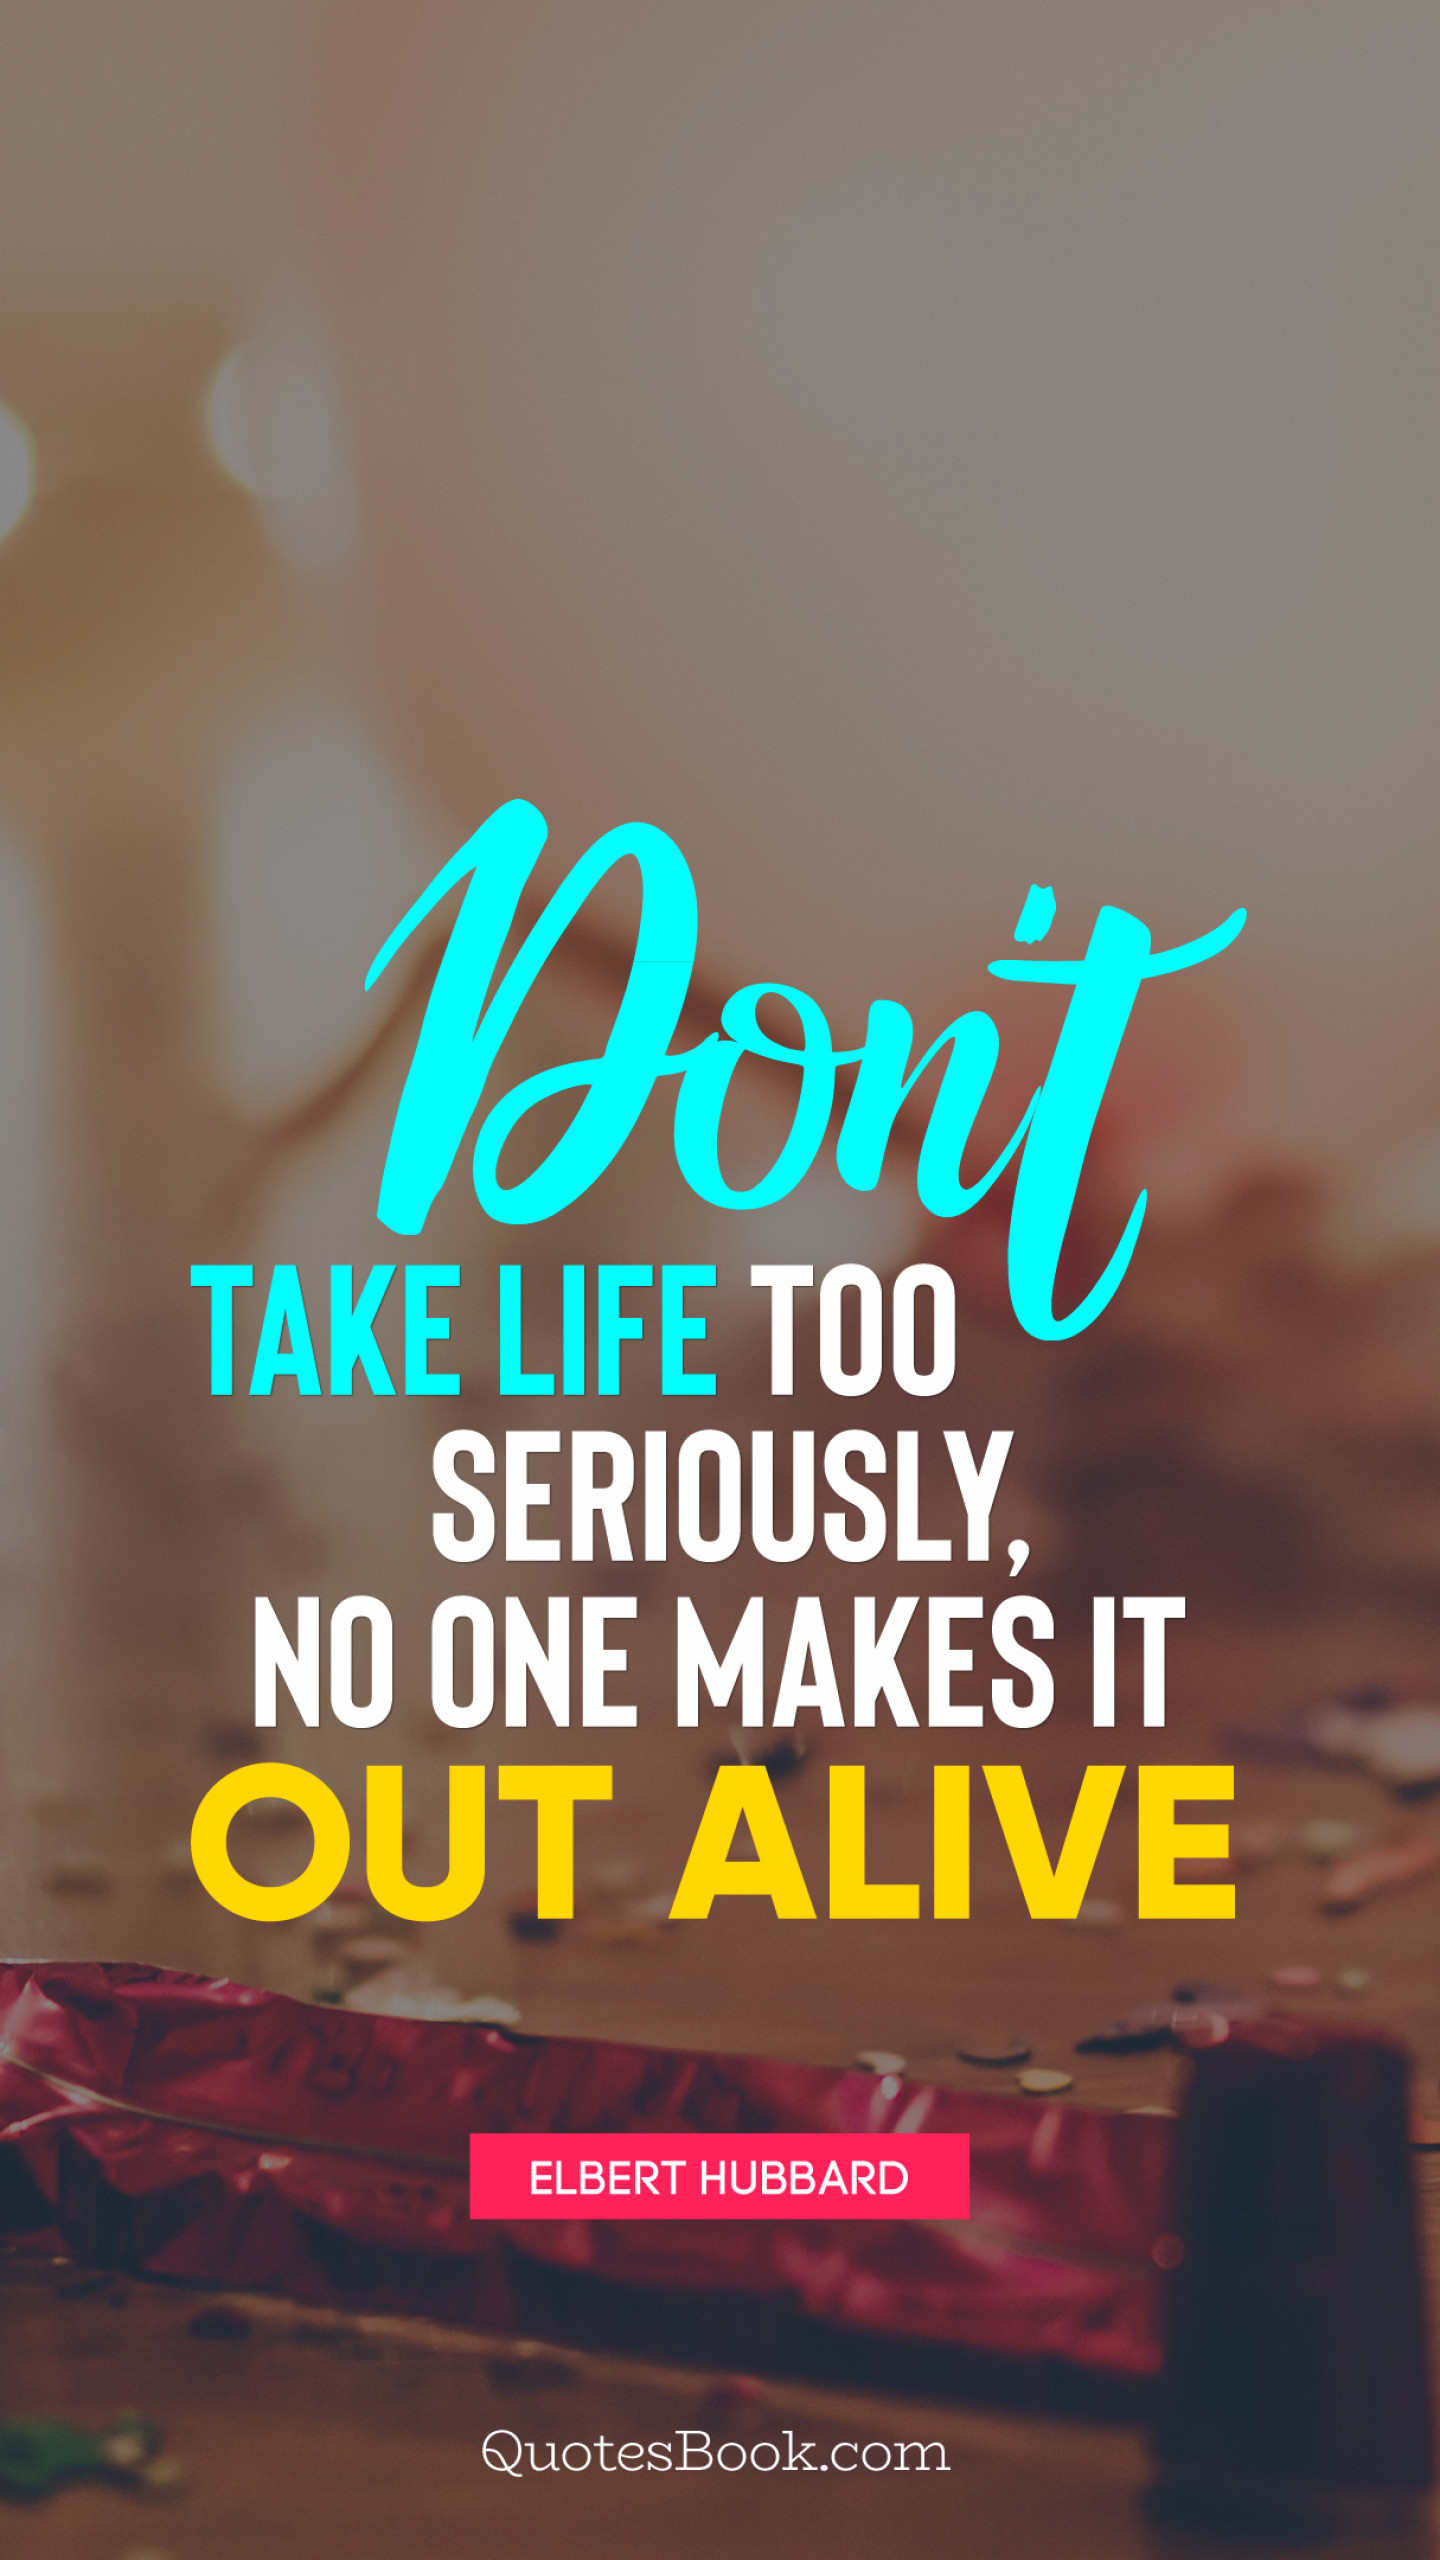 Don't take life too seriously, no one makes it out alive. - Quote by